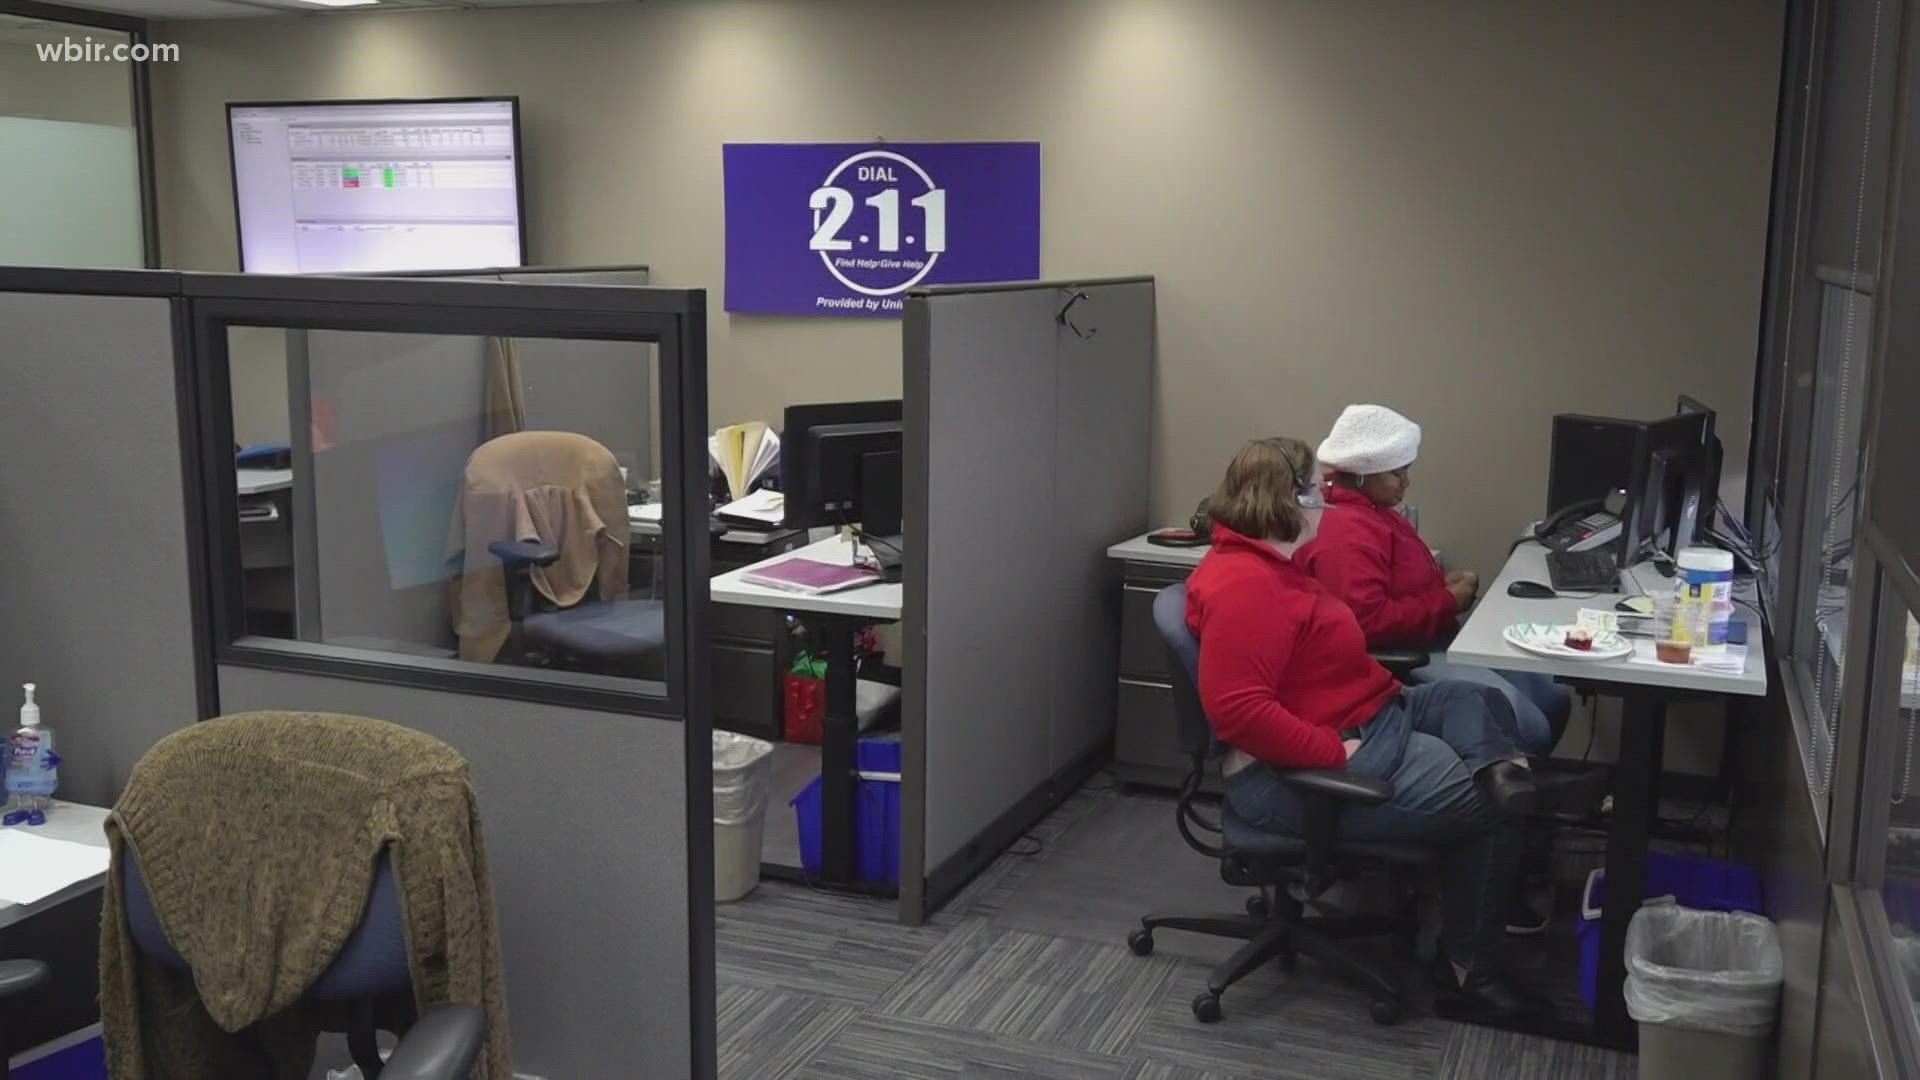 The 211 call center helps connect people with professionals who can help with anything they need at the time. In one man's case, it saved his life.